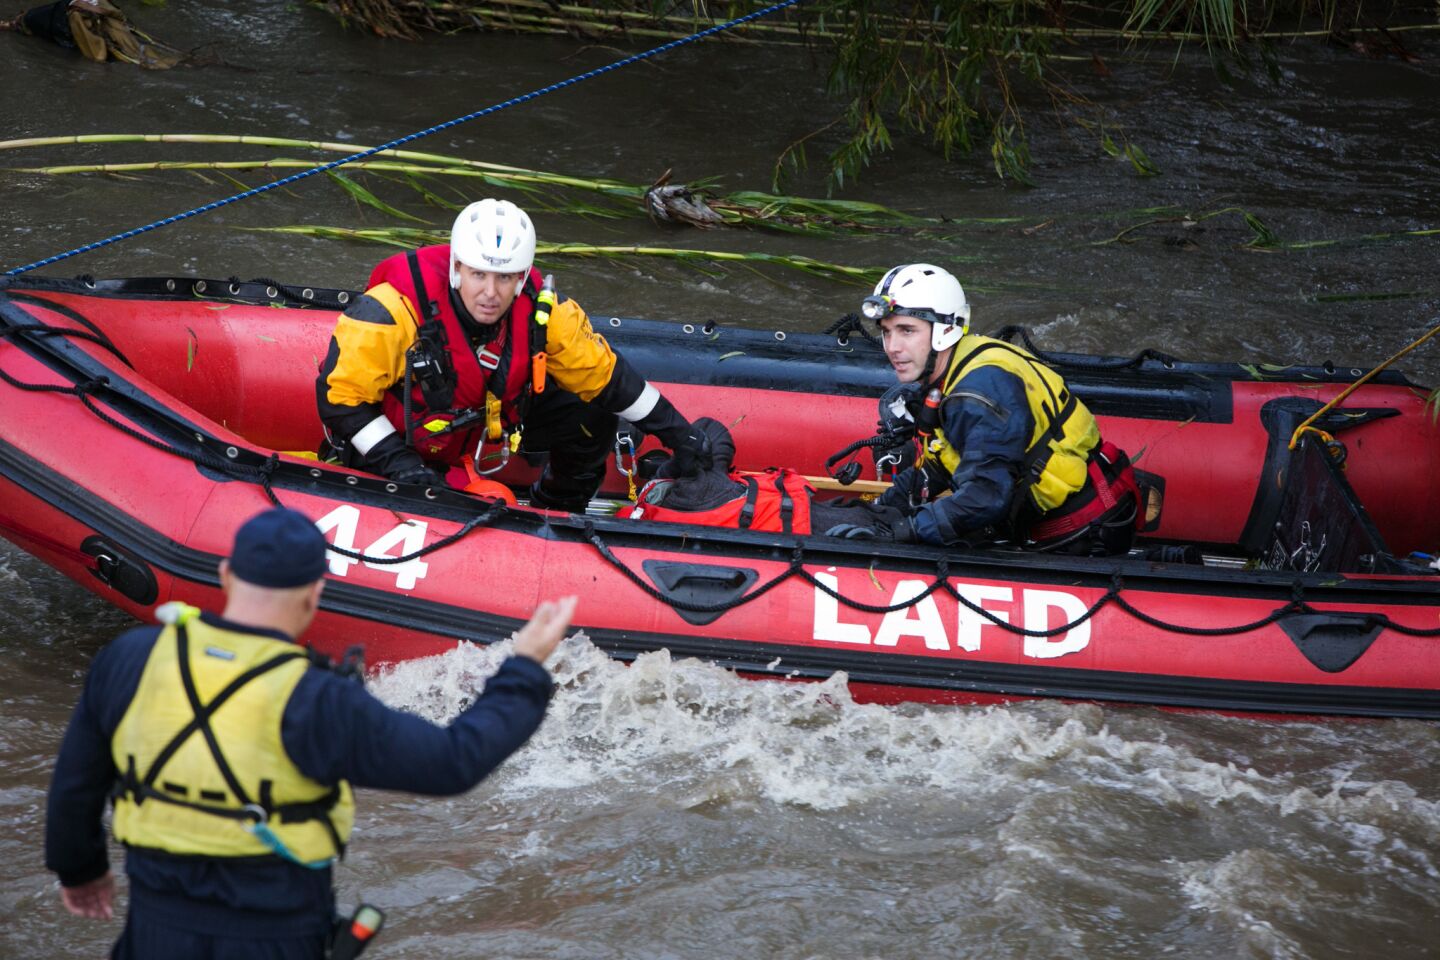 Fire Department swift water rescue members make their way across the storm-swollen Los Angeles River after rescuing a woman.